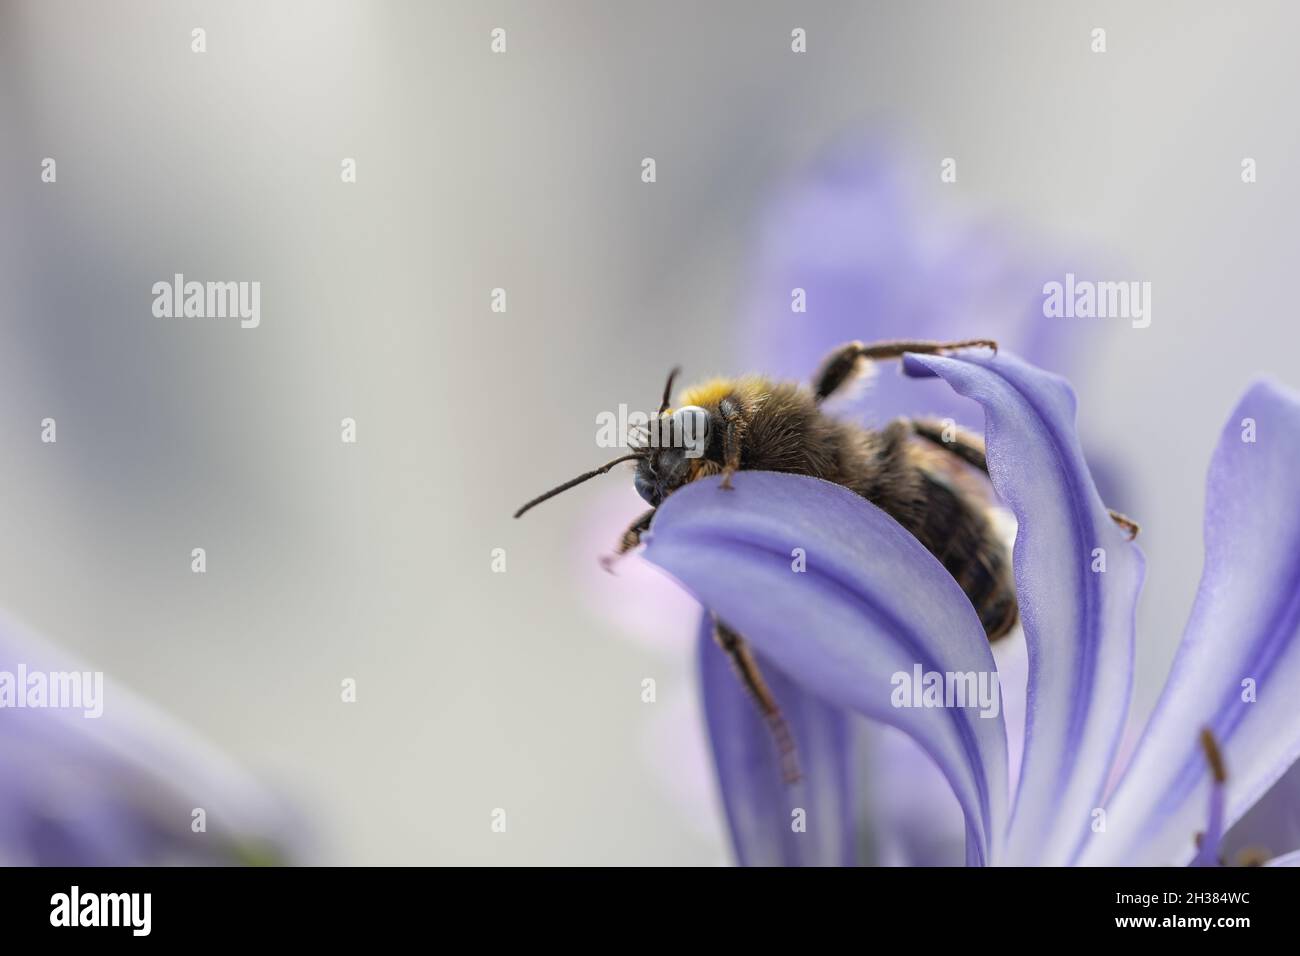 Close-up face to face with a bee sitting an Agapanthus flower Stock Photo